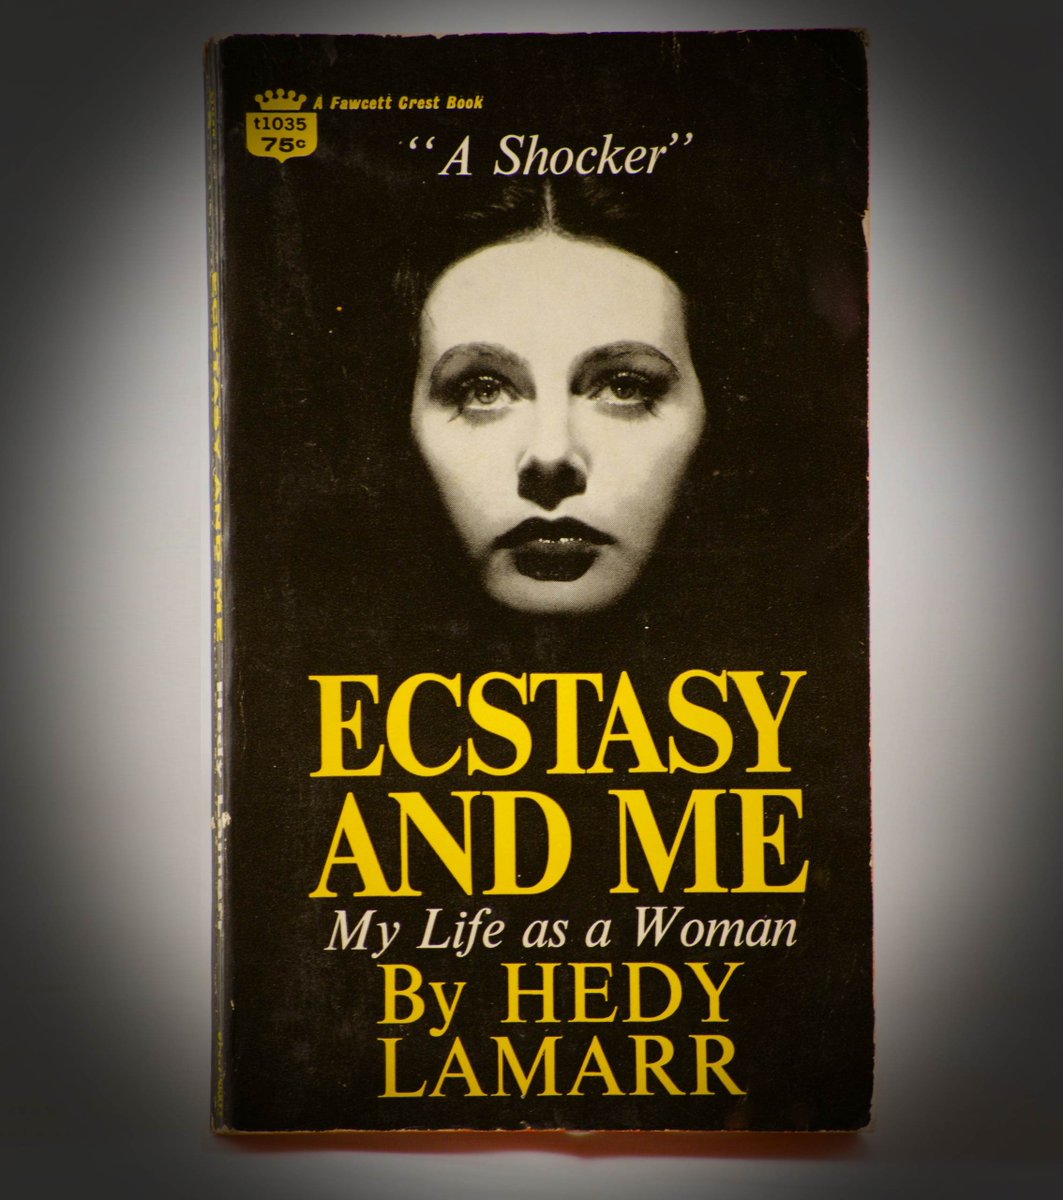 New book to read, yahoo!  #HedyLamarr #Hollywoodscandal #pulpfiction